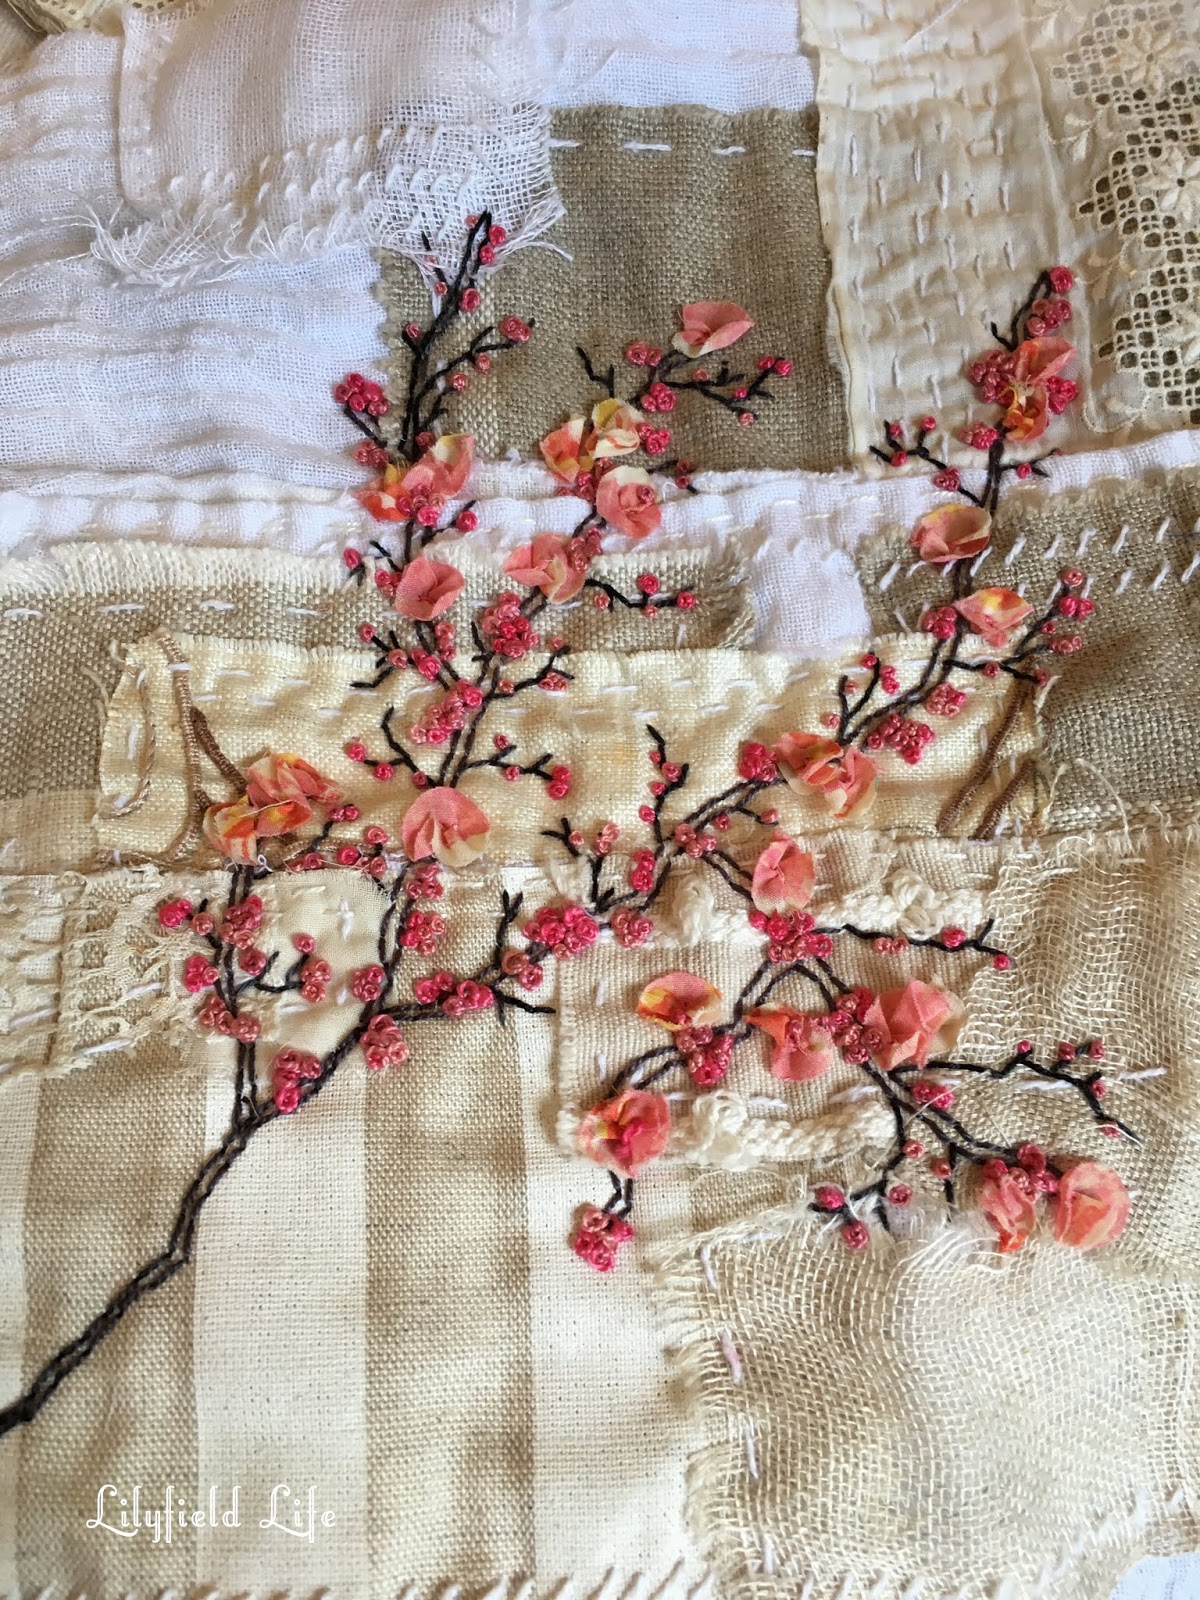 Lilyfield Life: the lost art of slow stitching - Forage by Lisa